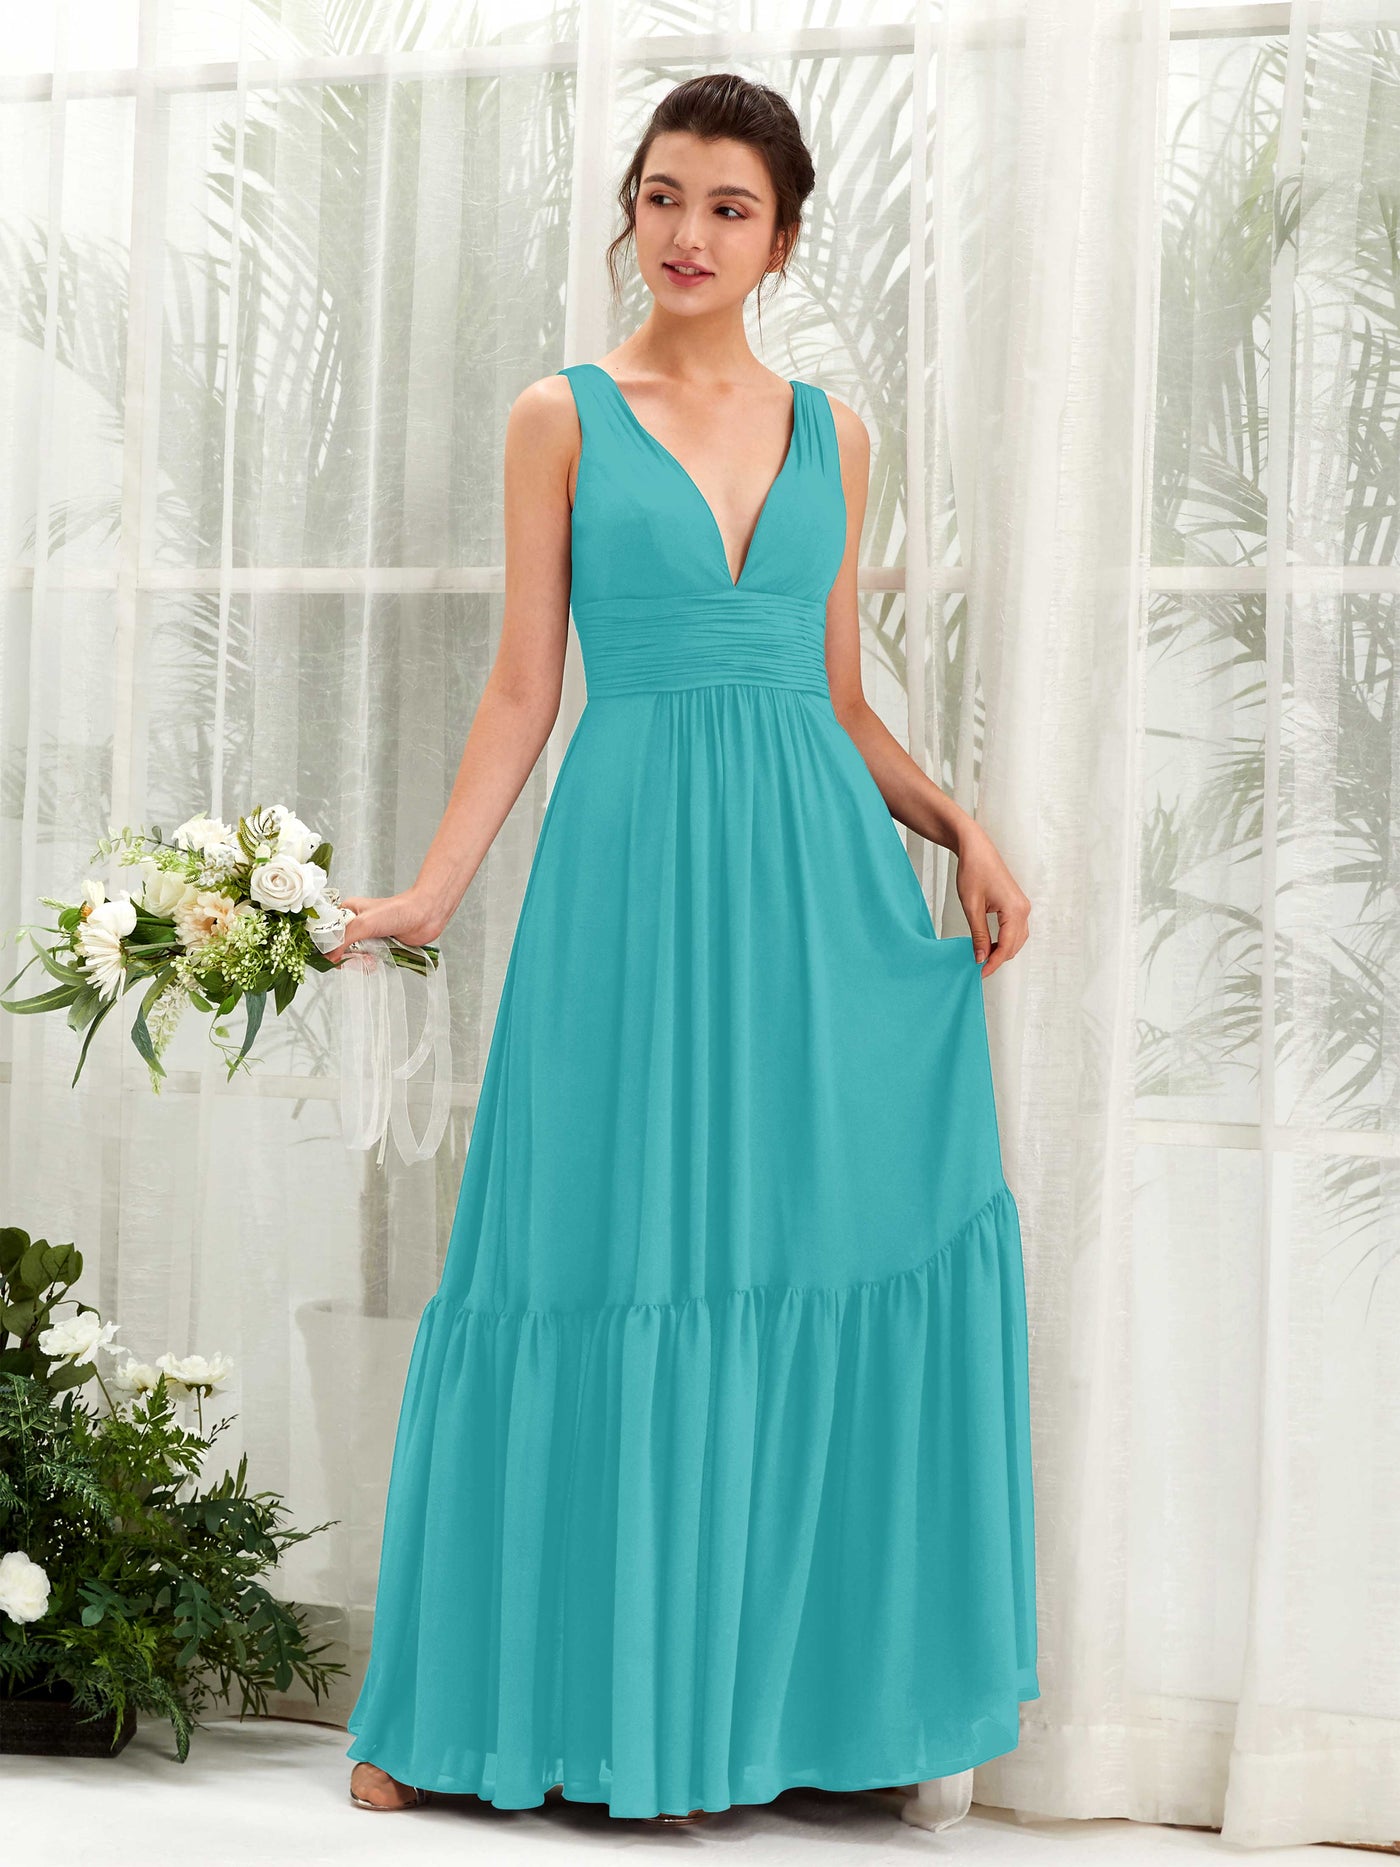 Turquoise Bridesmaid Dresses Bridesmaid Dress A-line Chiffon Straps Full Length Sleeveless Wedding Party Dress (80223723)#color_turquoise